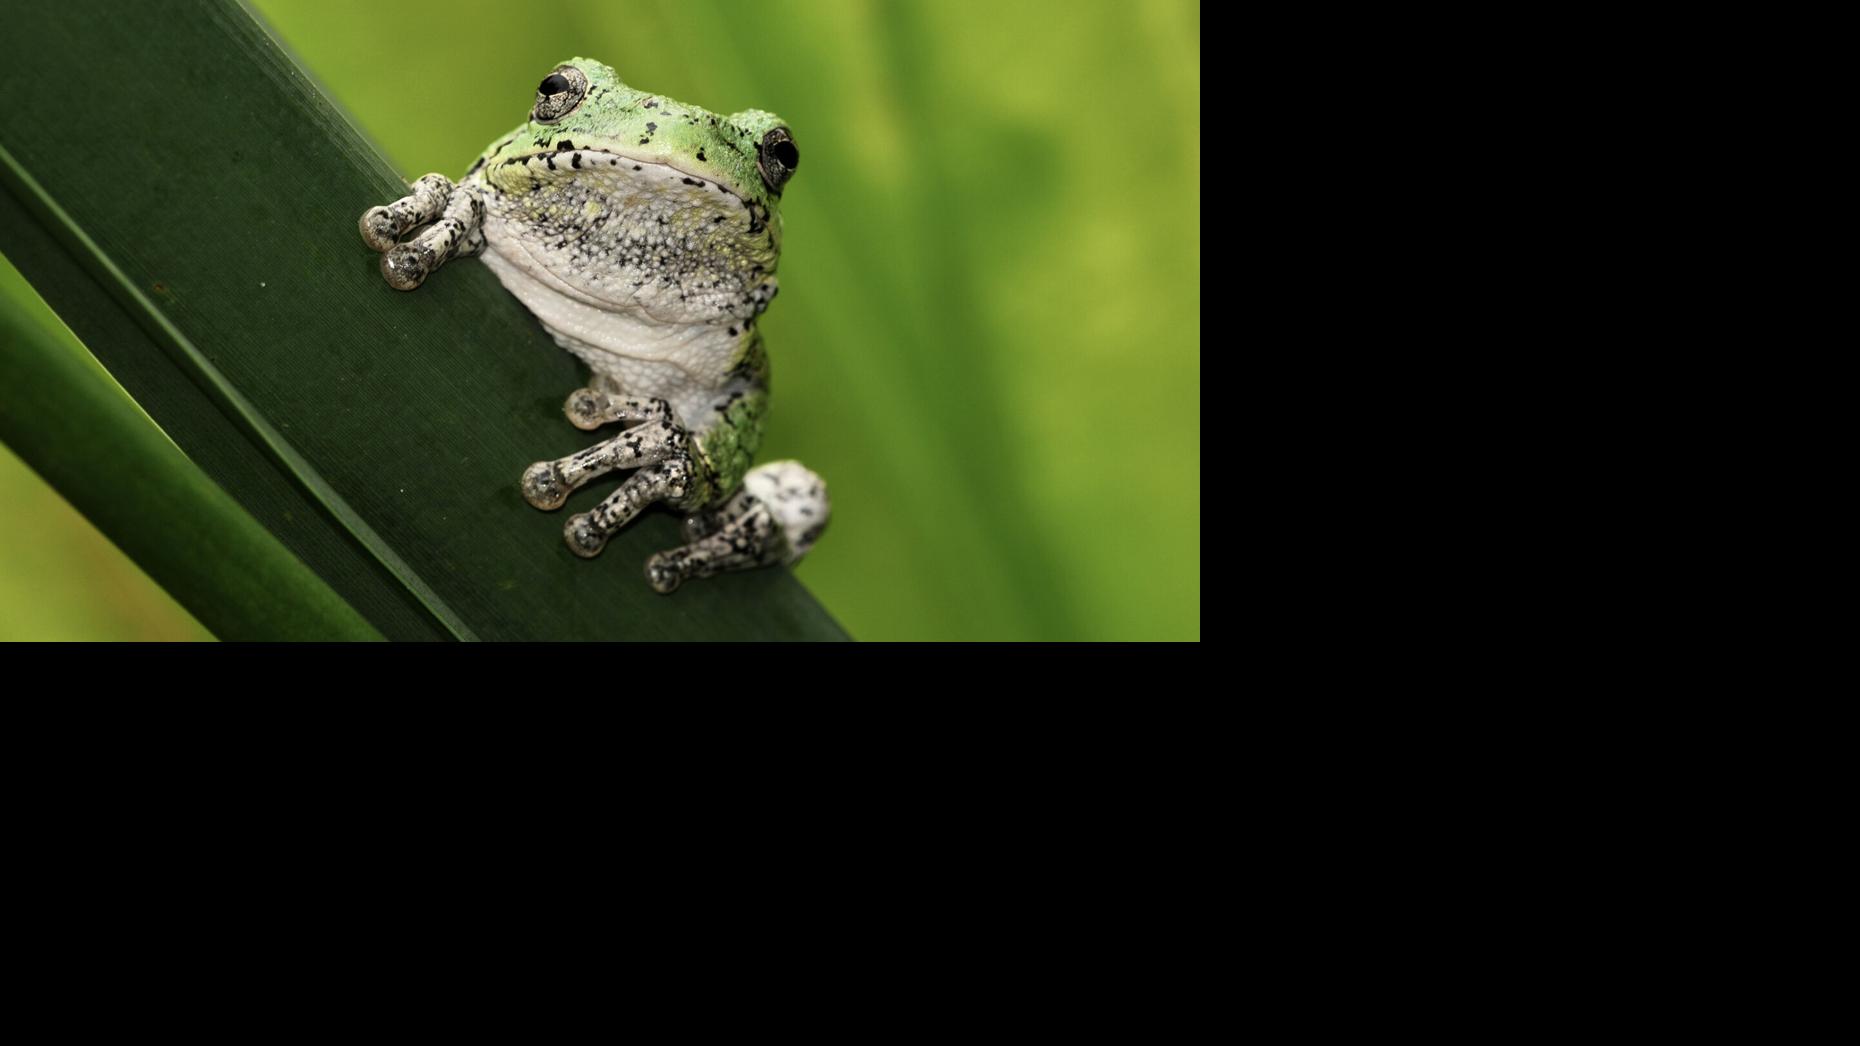 What's a treefrog to do when it gets cold? Sleep, maybe freeze